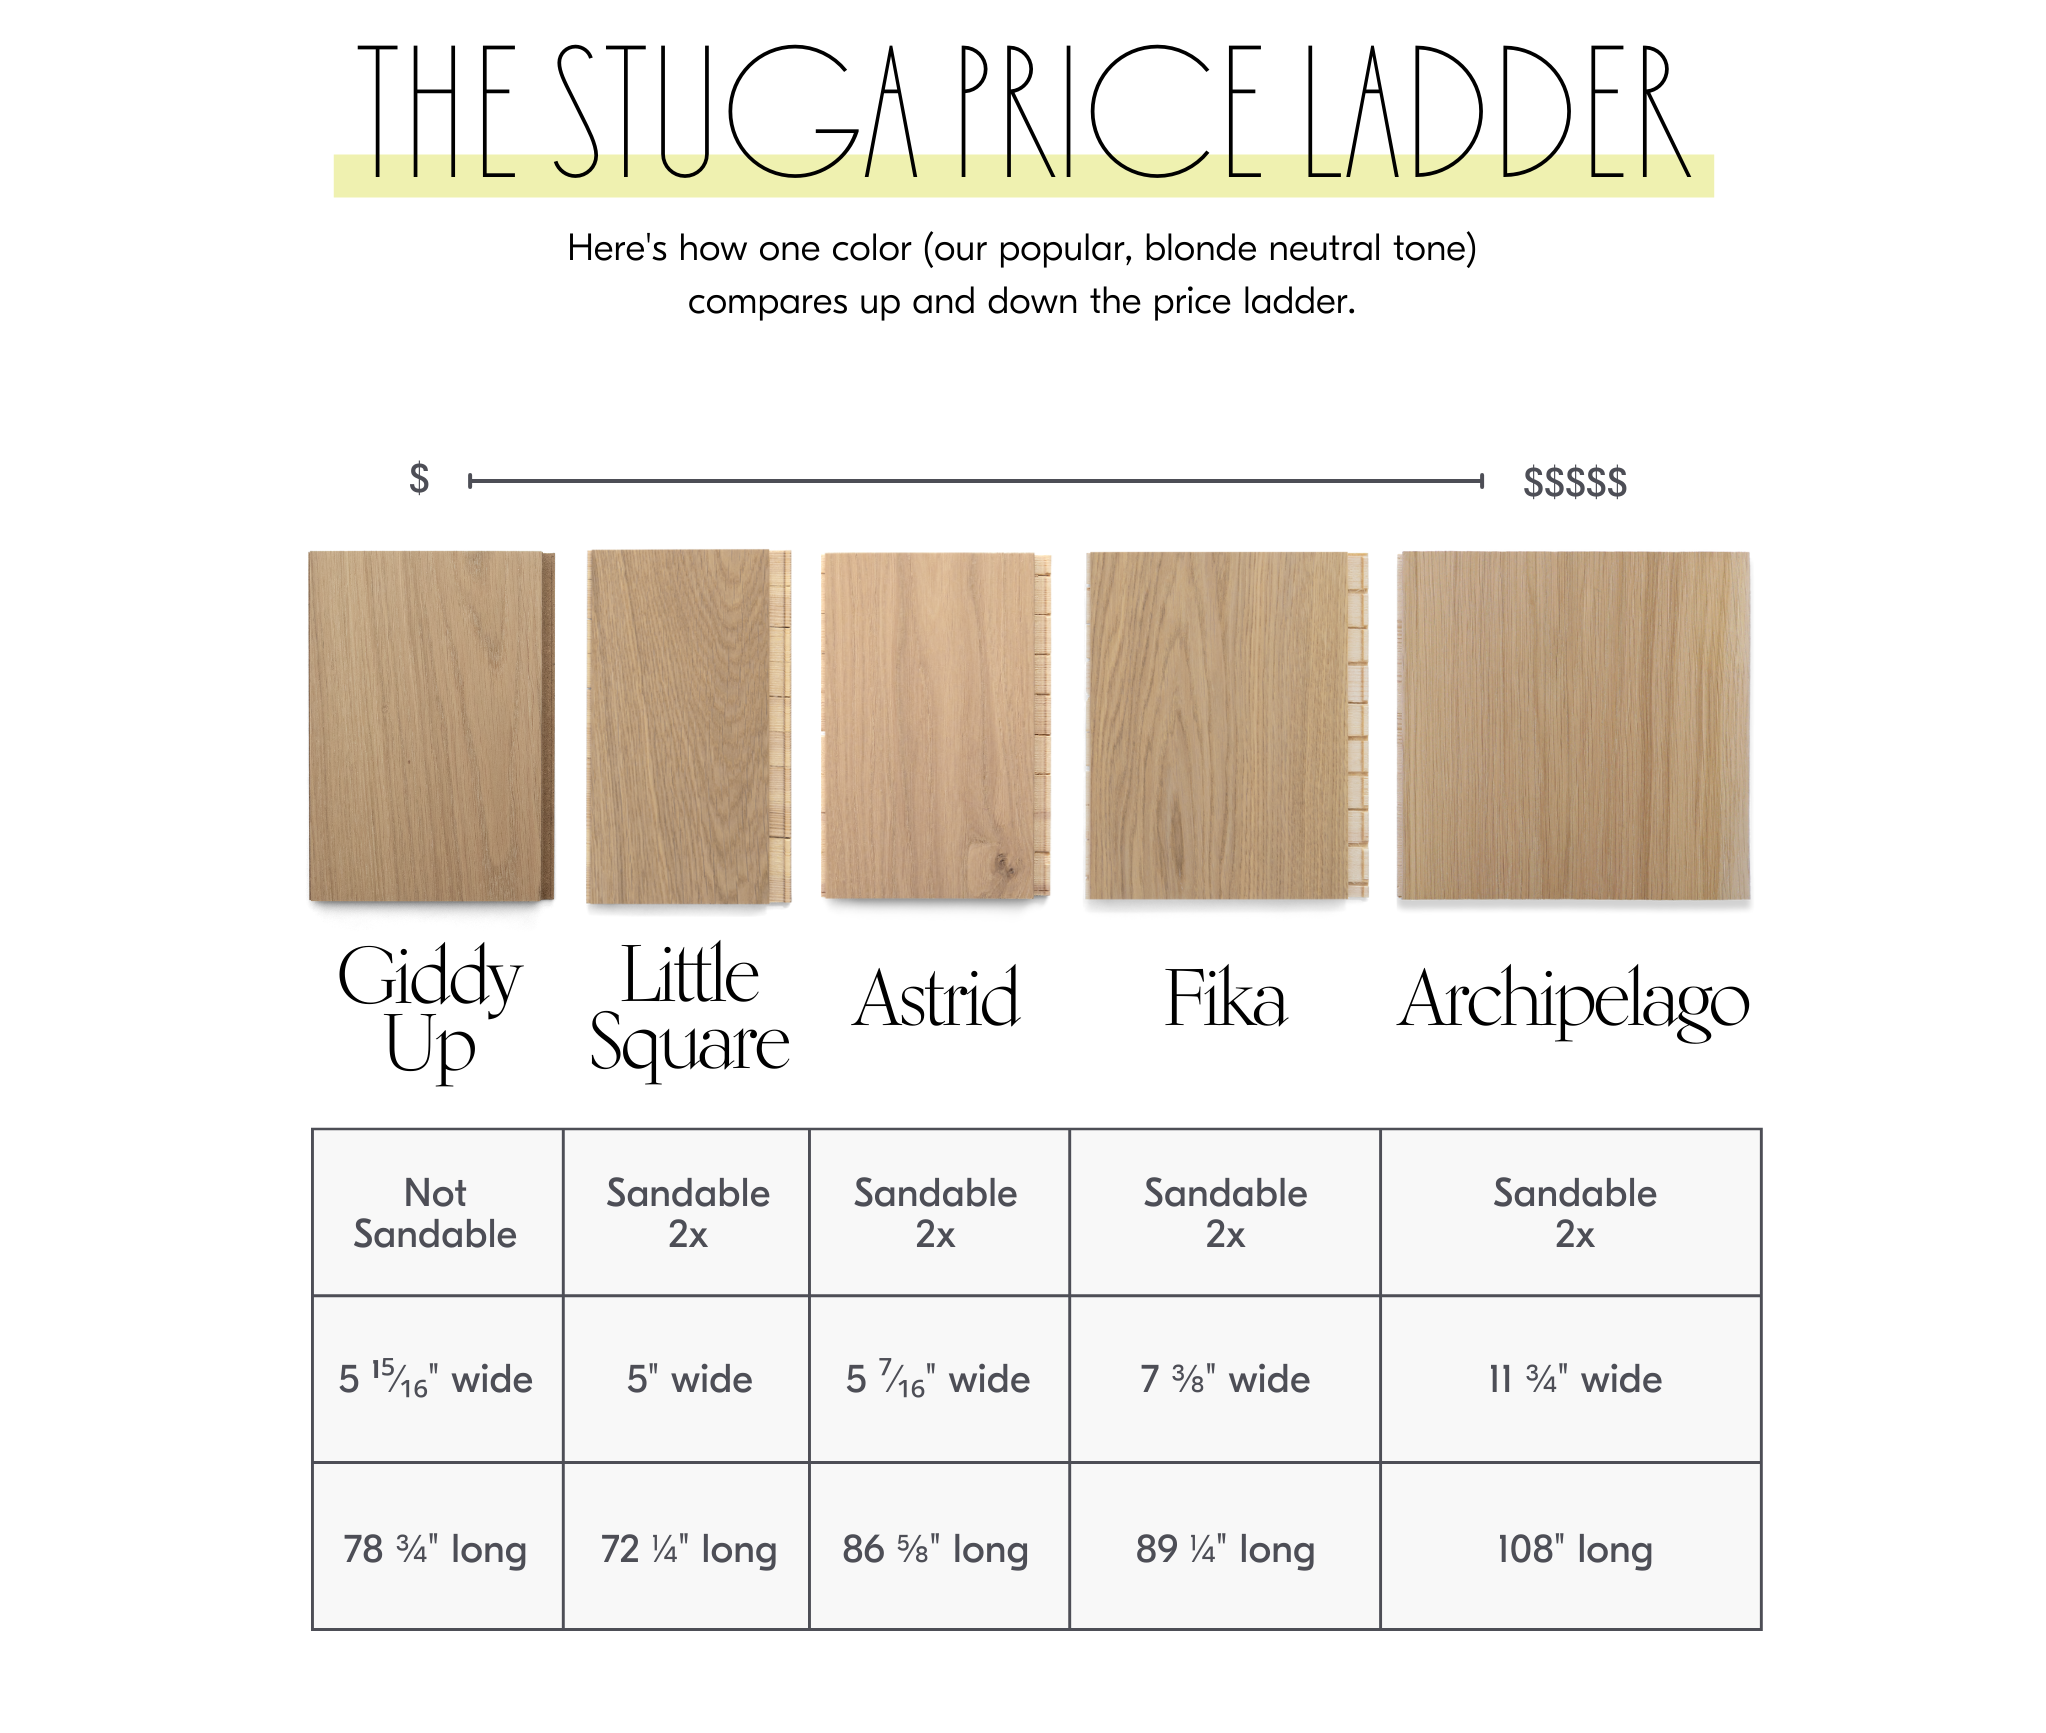 Chart comparing costs of different blonde hardwood floors by Stuga